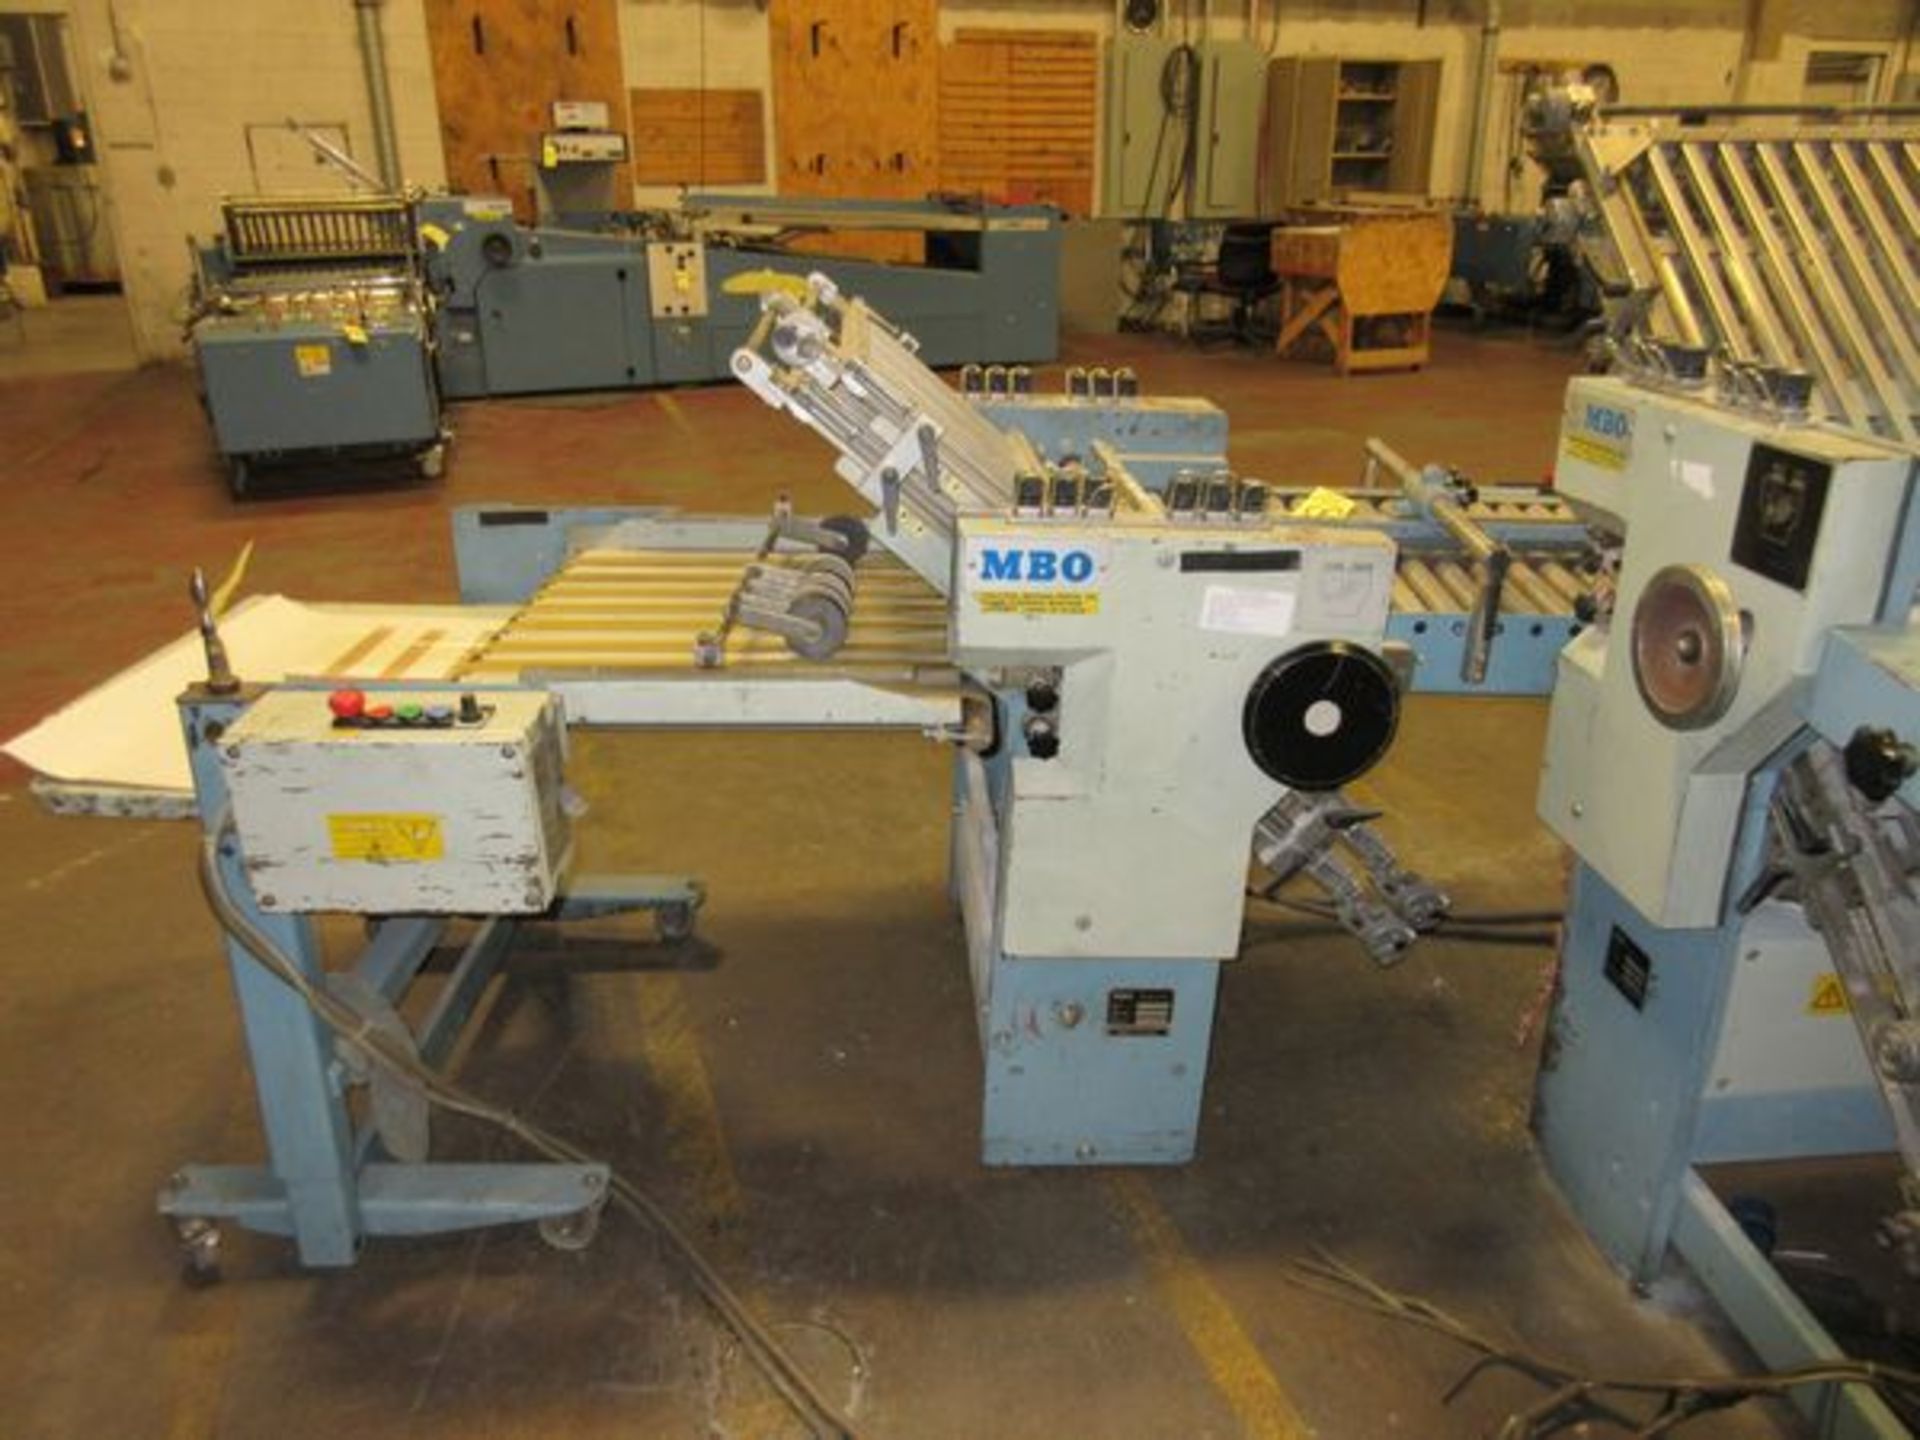 MBO Model B26-C, 26" Continuous Feed Folder, s/n P11/50, MCC3 Electric Counter, MBO Right Angle - Image 2 of 5